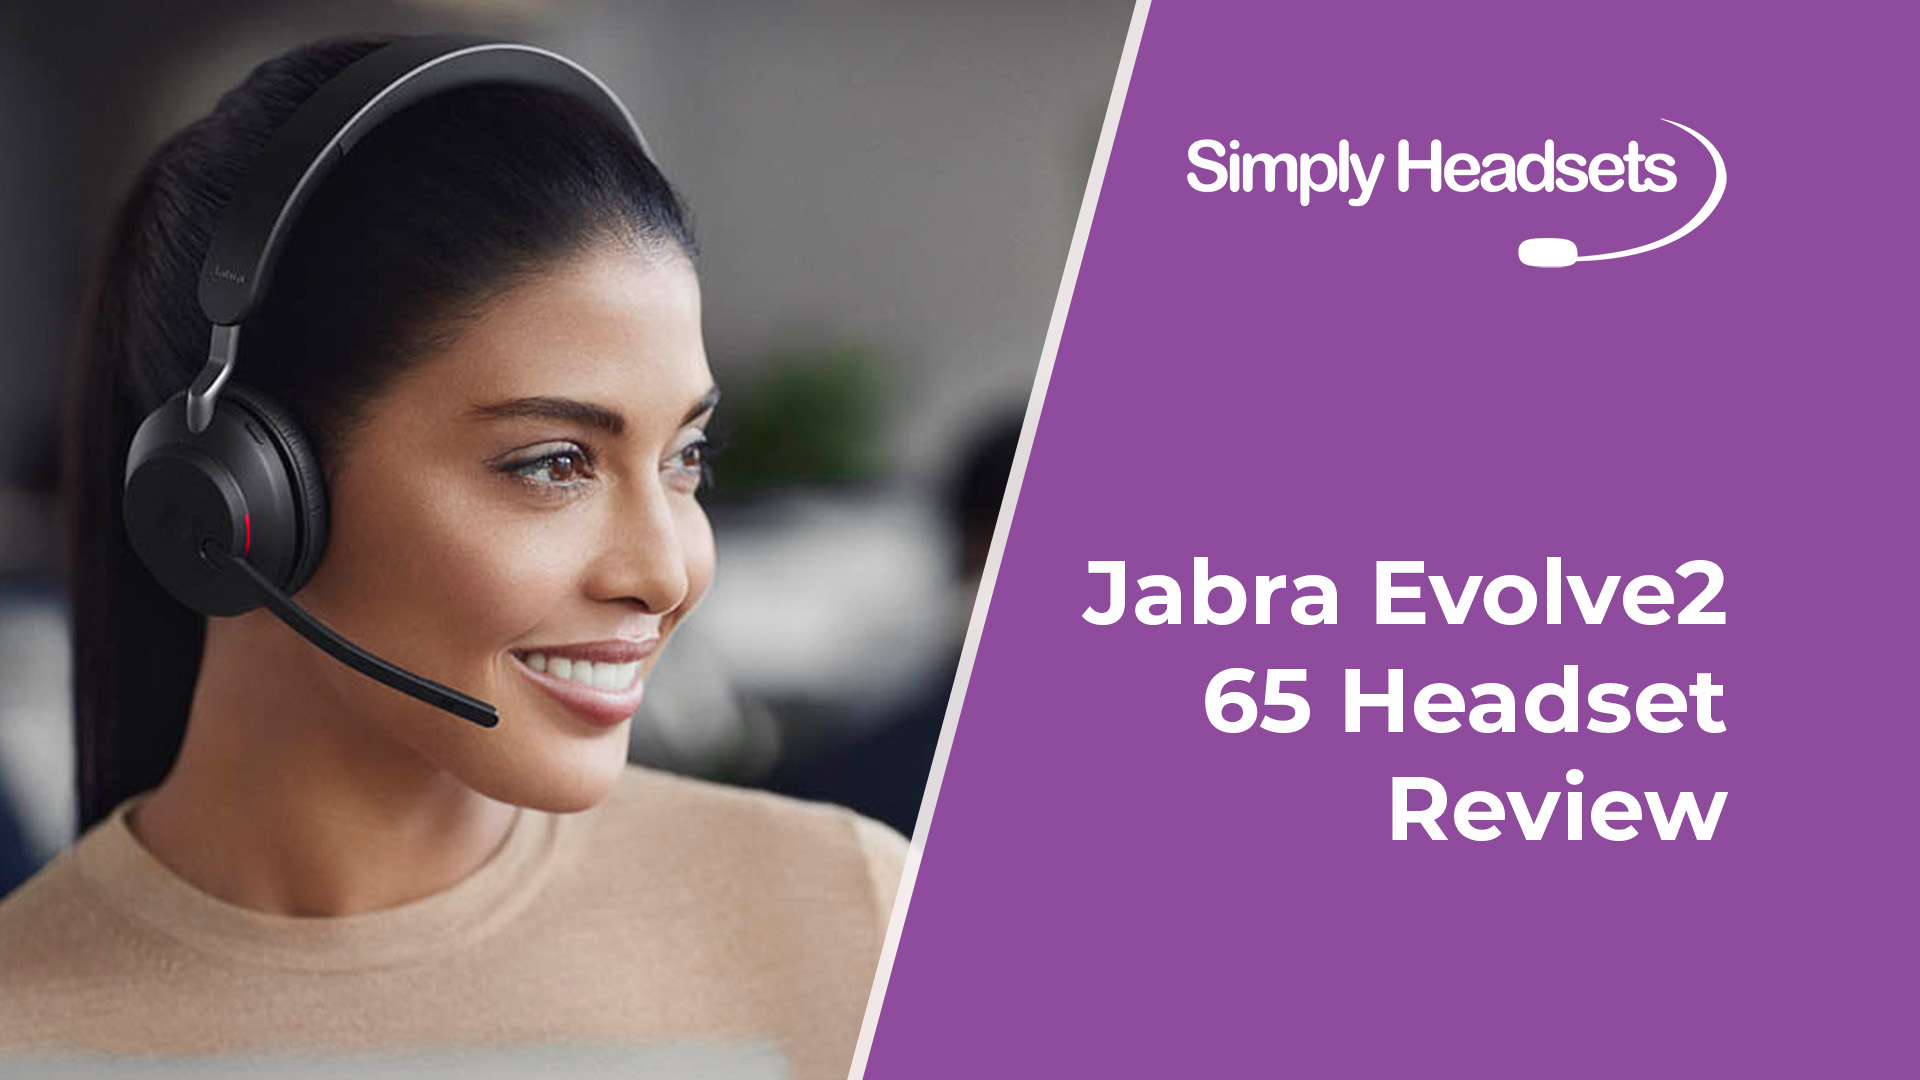 Jabra Evolve2 65 Headset Review 2023| Simply Headsets